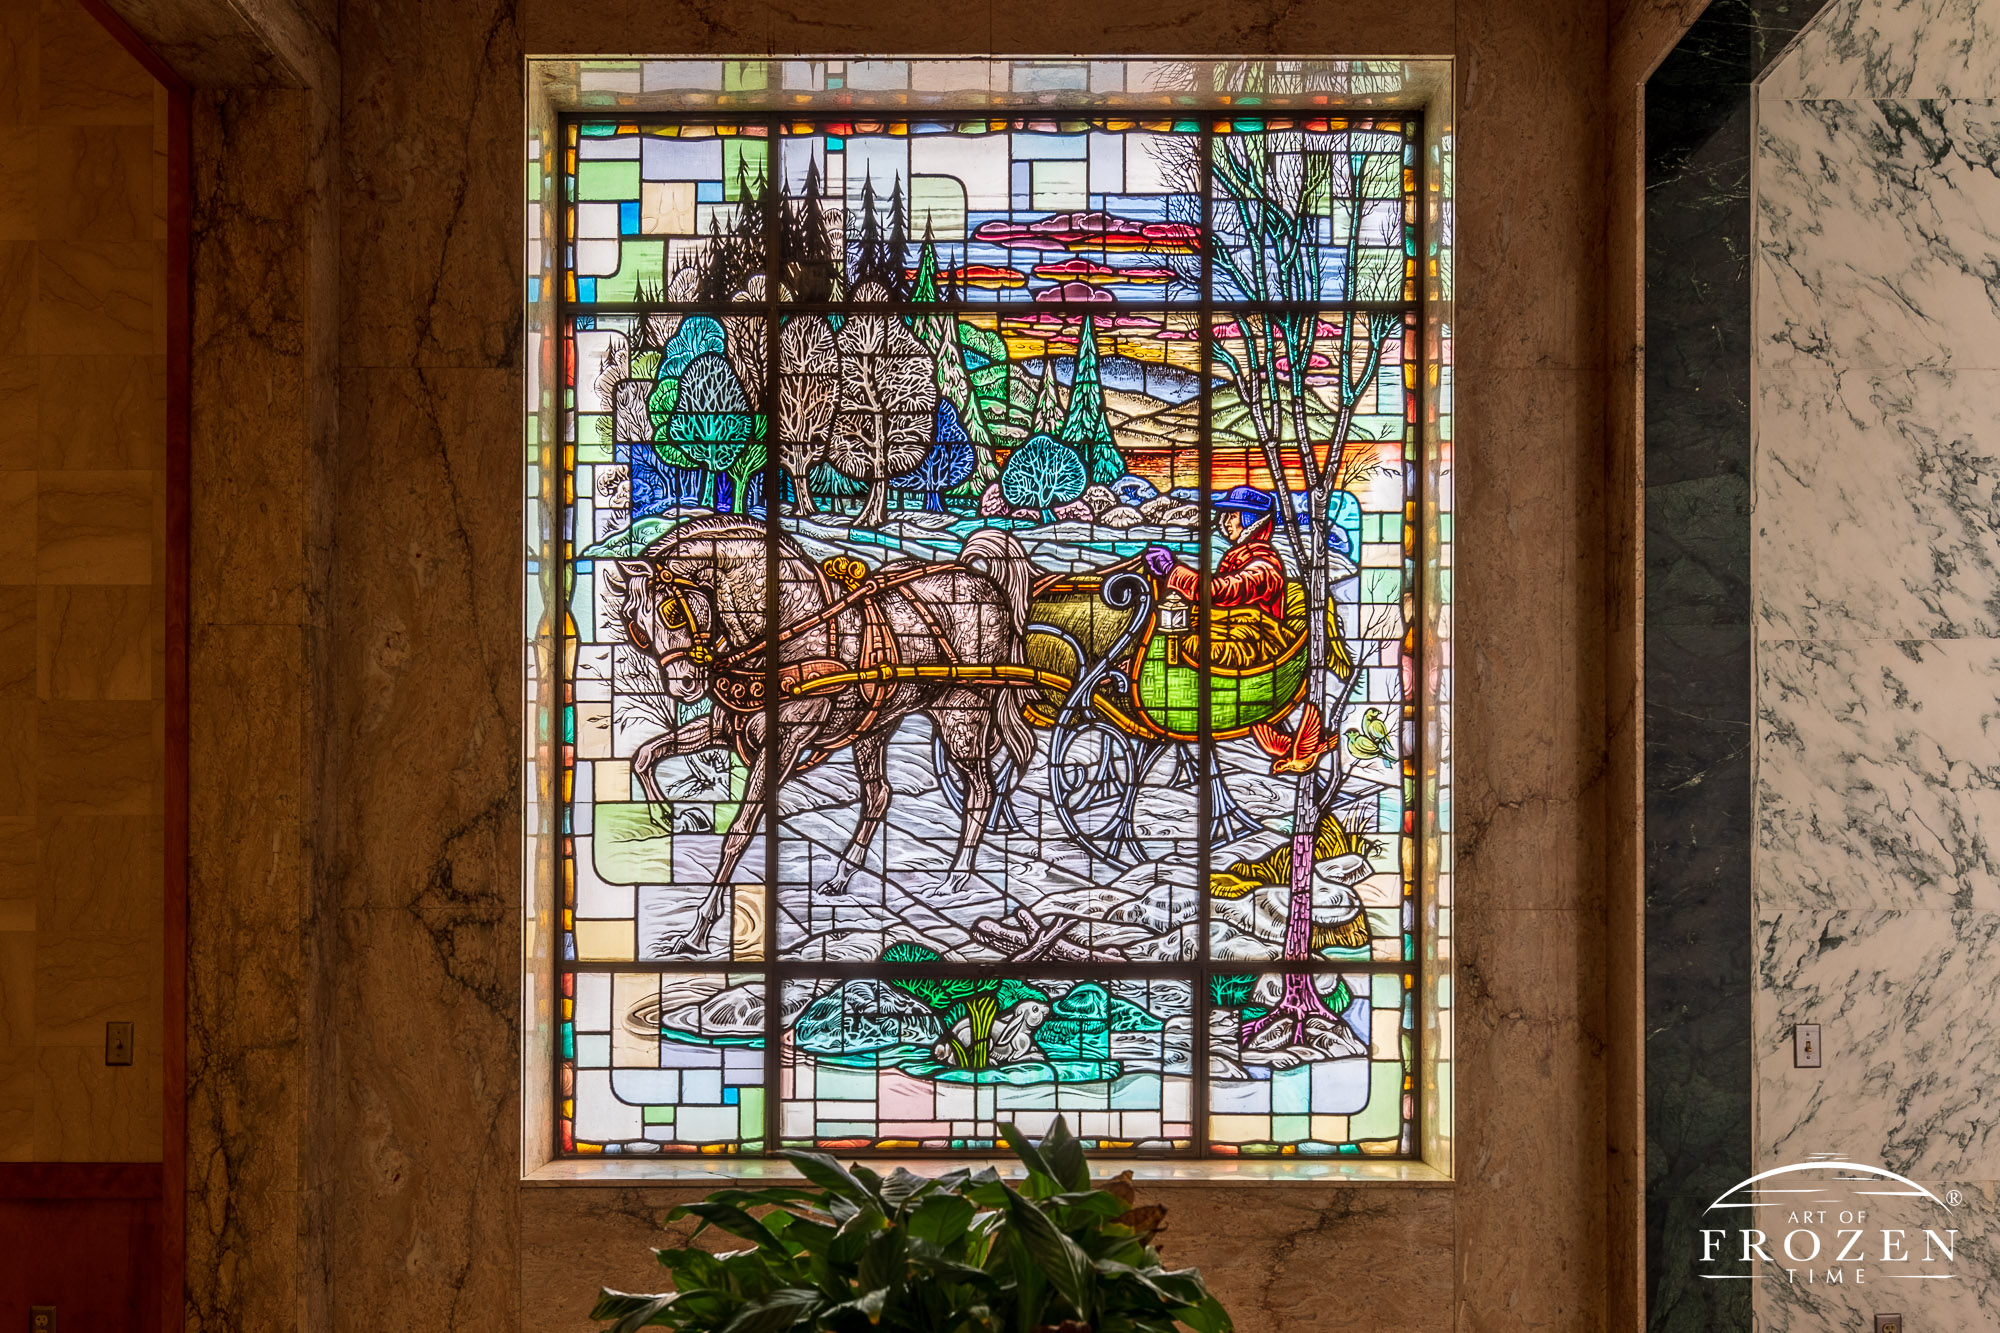 Historic stained-glass windows created by Louis Comfort Tiffany featuring his opalescent glass depicting a horse-draw sleigh by a forest under a colorful sunset